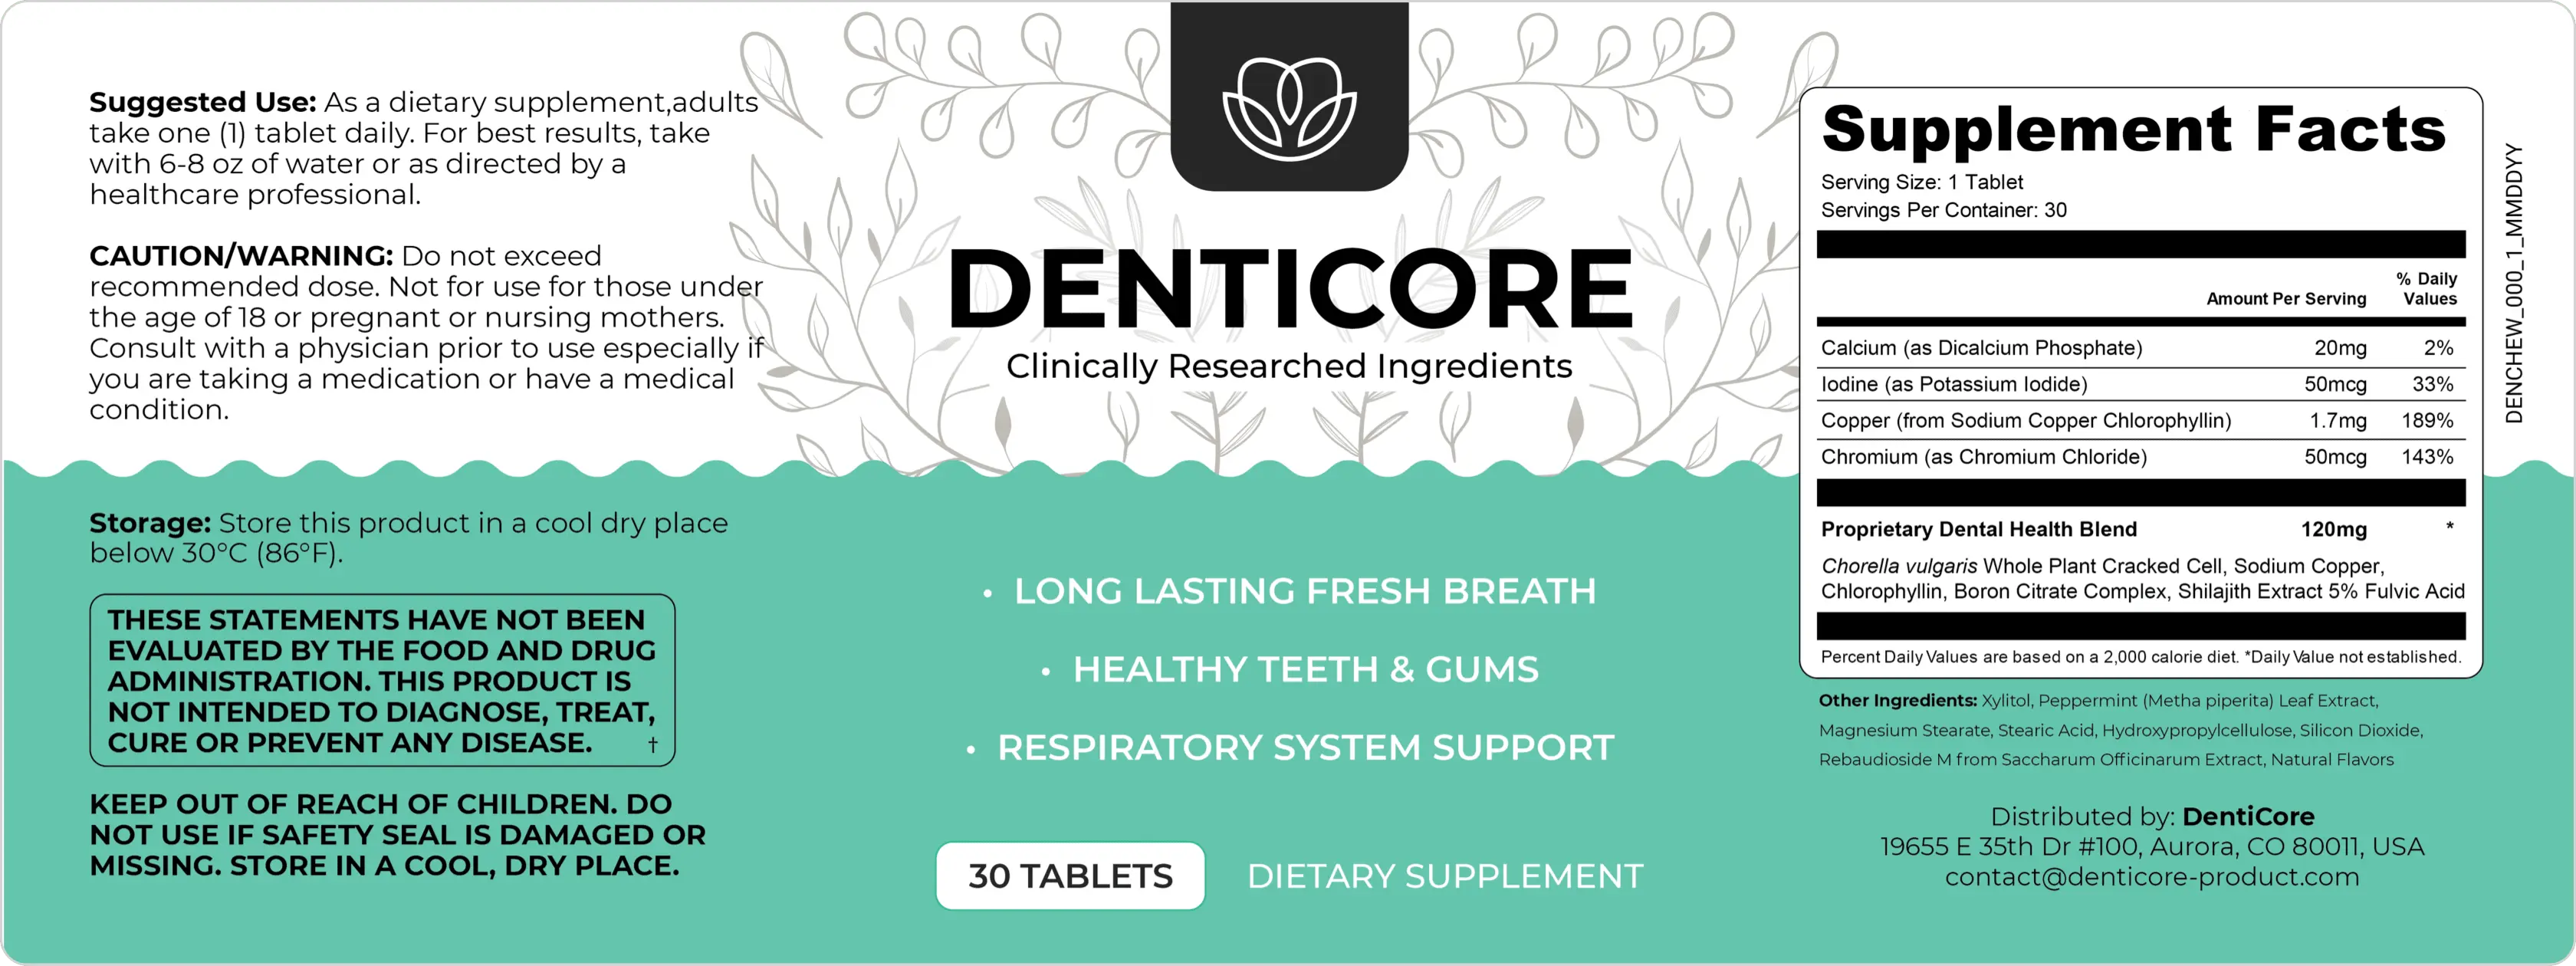 denticore-ingredients-lists